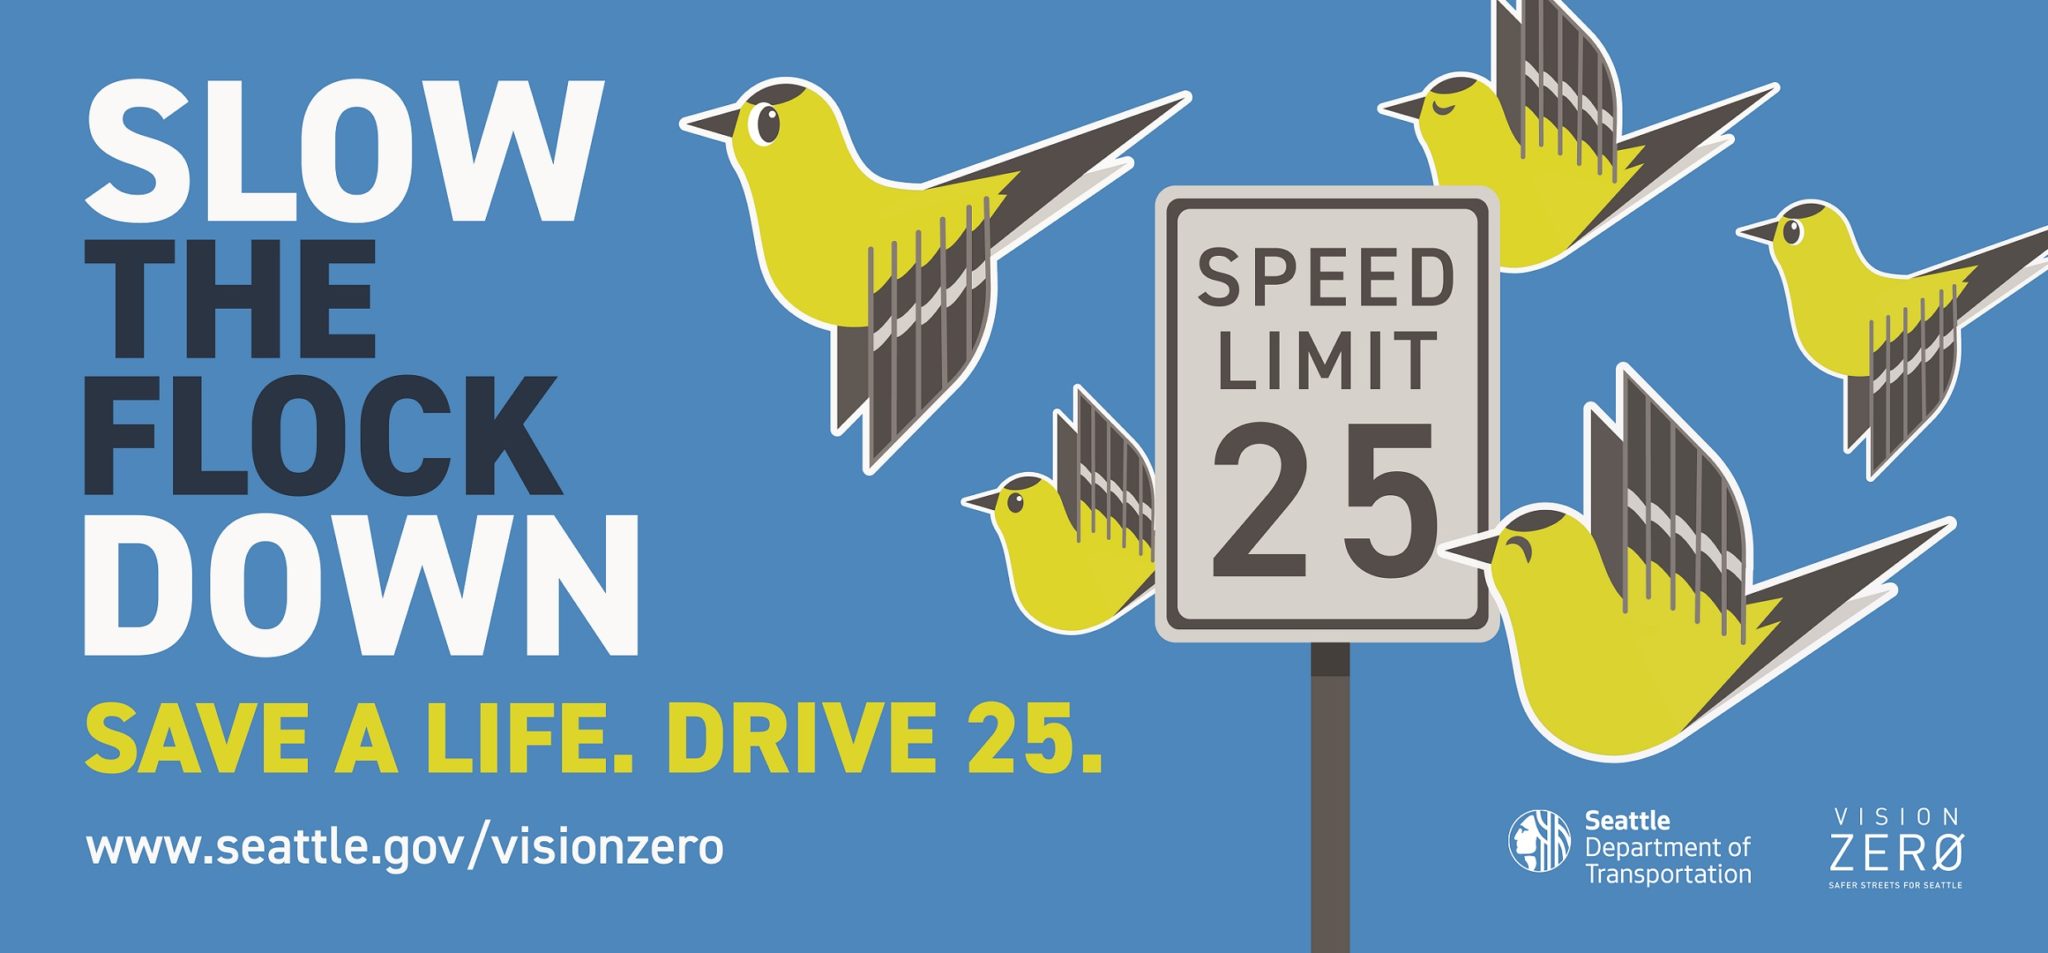 Graphic highlighting a public education campaign encouraging drivers to slow down. The graphic shows several birds with a 25 MPH speed limit sign, with text saying "slow the flock down."